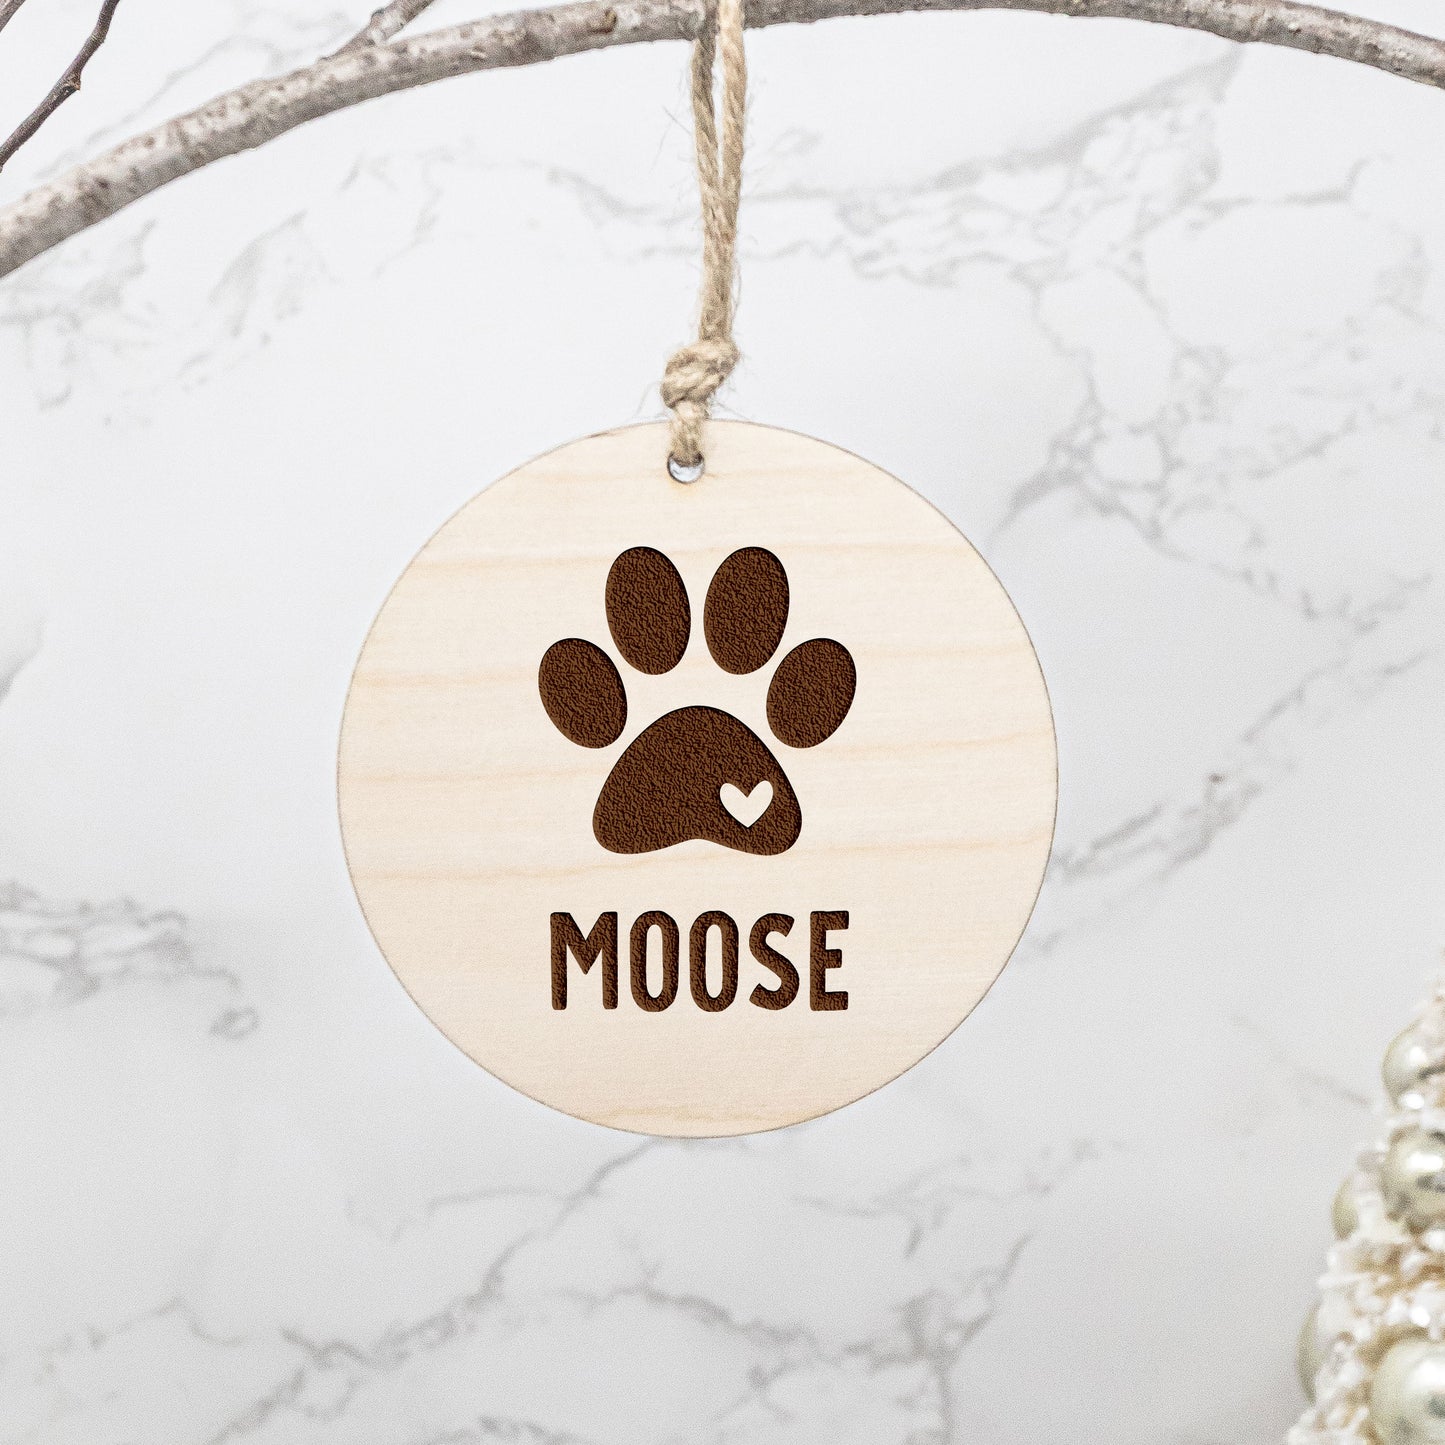 Paw Print Personalized Wood Slice Ornament